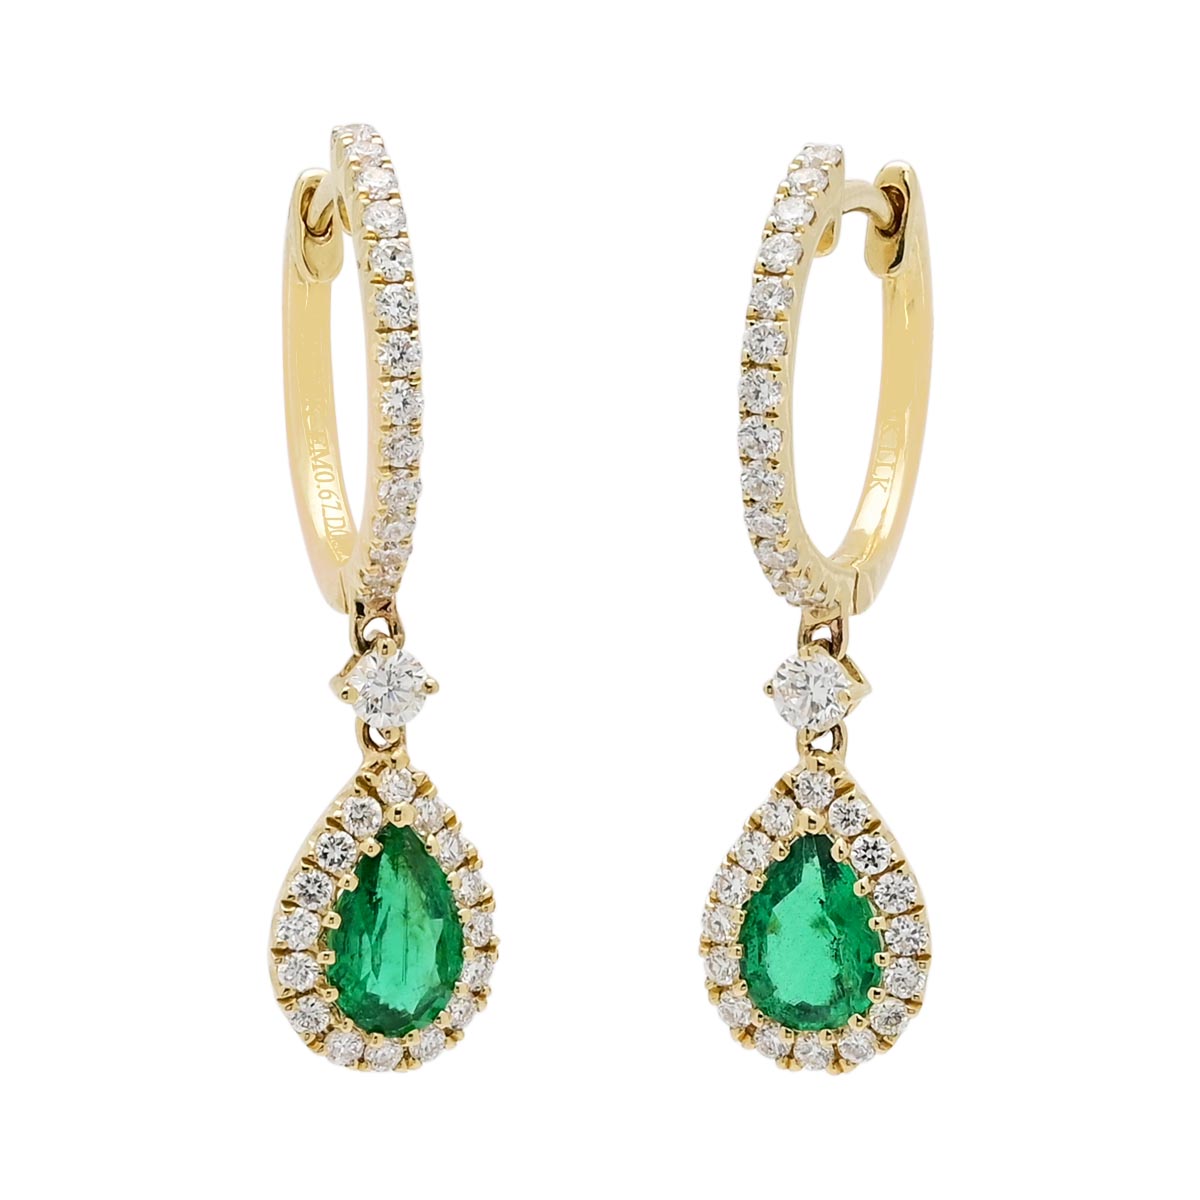 Pear Shape Emerald Earrings in 14kt Yellow Gold with Diamonds (1/2ct tw)